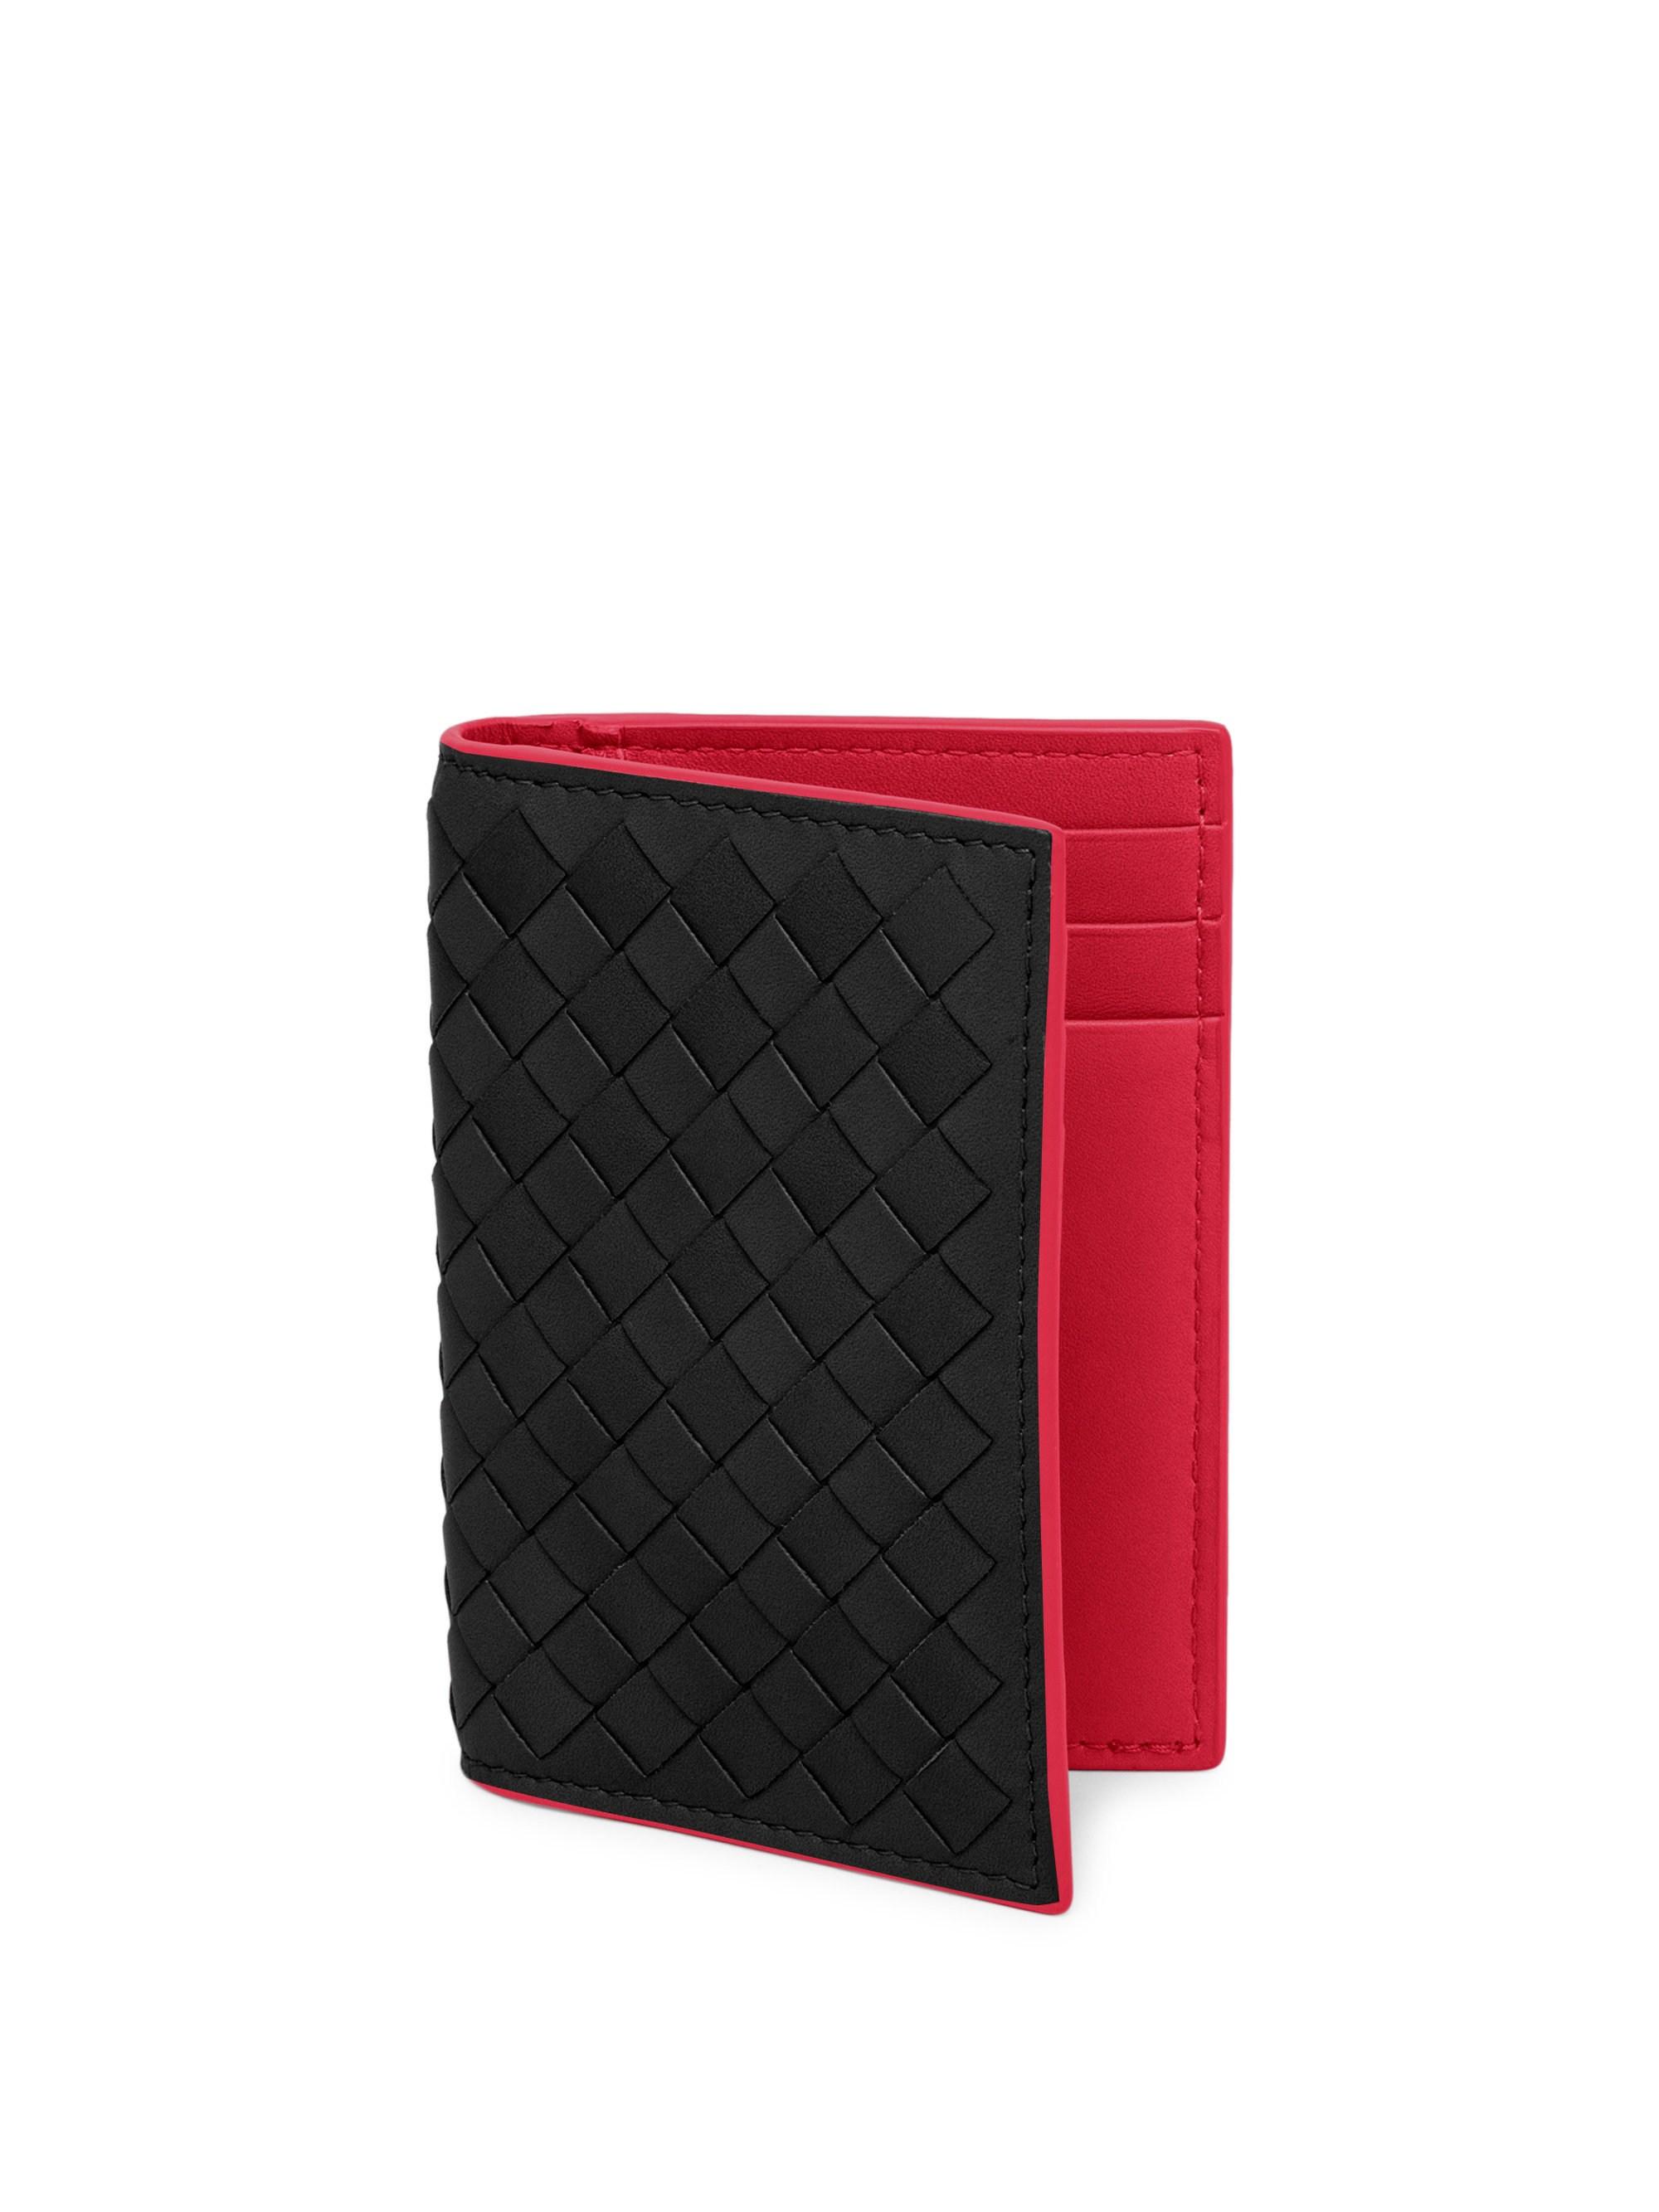 Black and red wallet